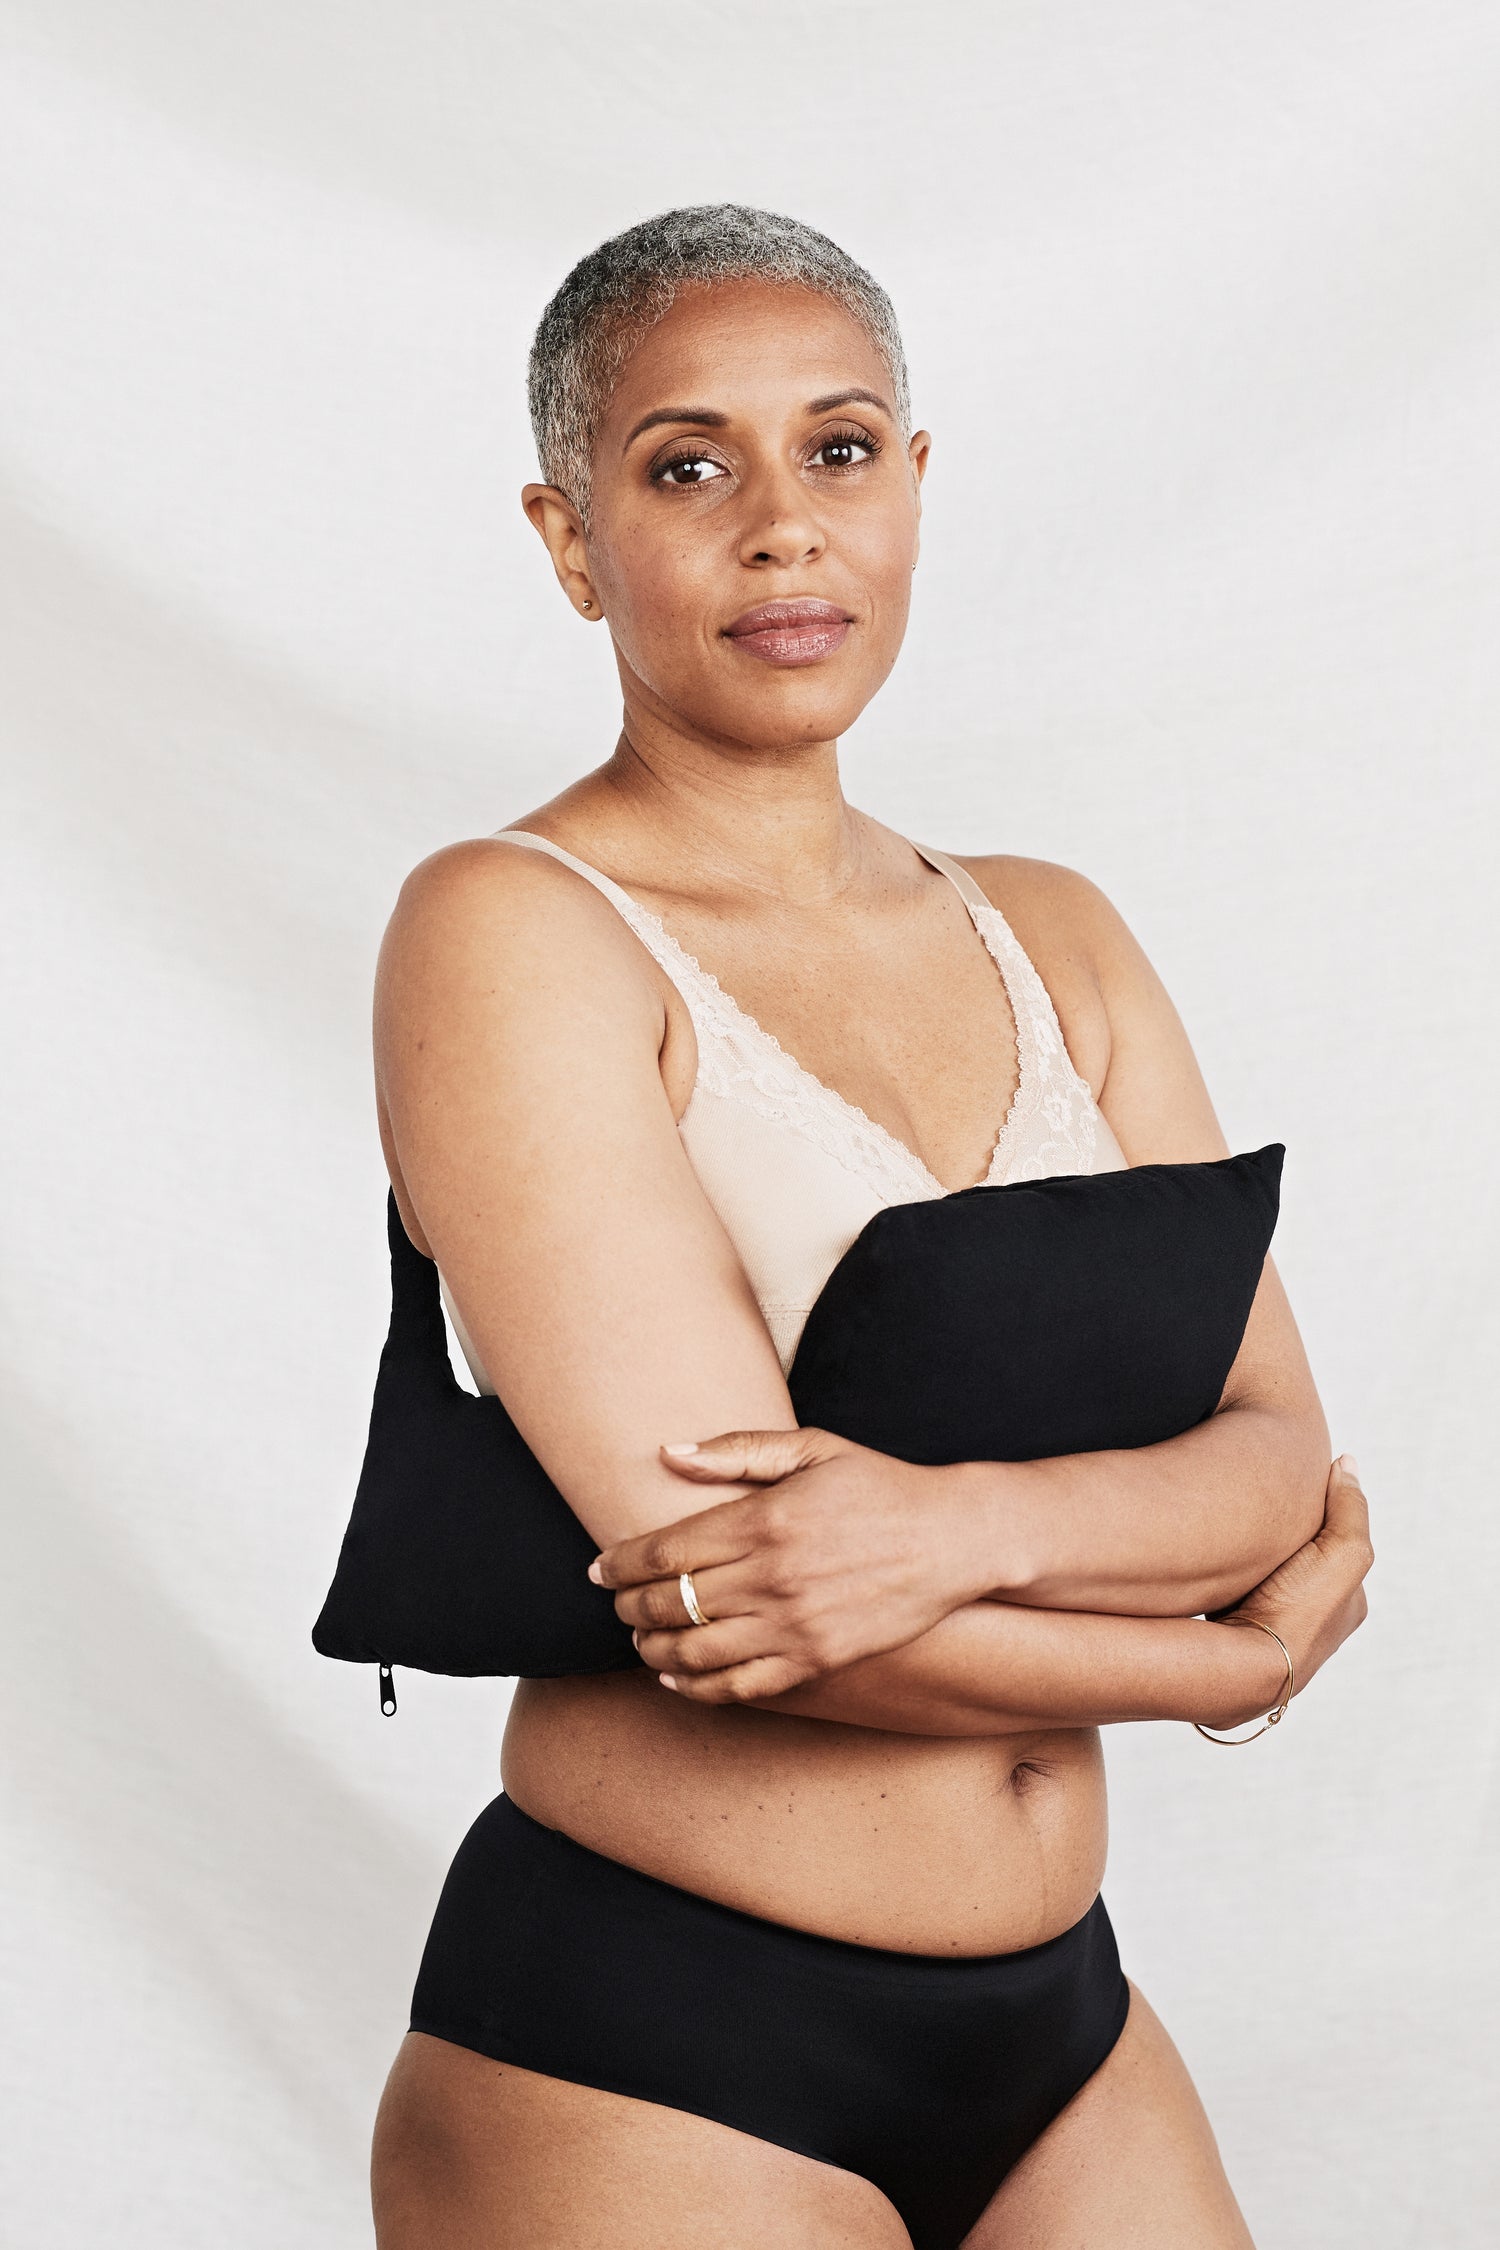 How Cherry Blossom Intimates Is Changing What It Looks Like to Be a Black  Woman in Tech.  Cherry Blossom Intimates is helping breast cancer  survivors shop for prosthetics with dignity. In